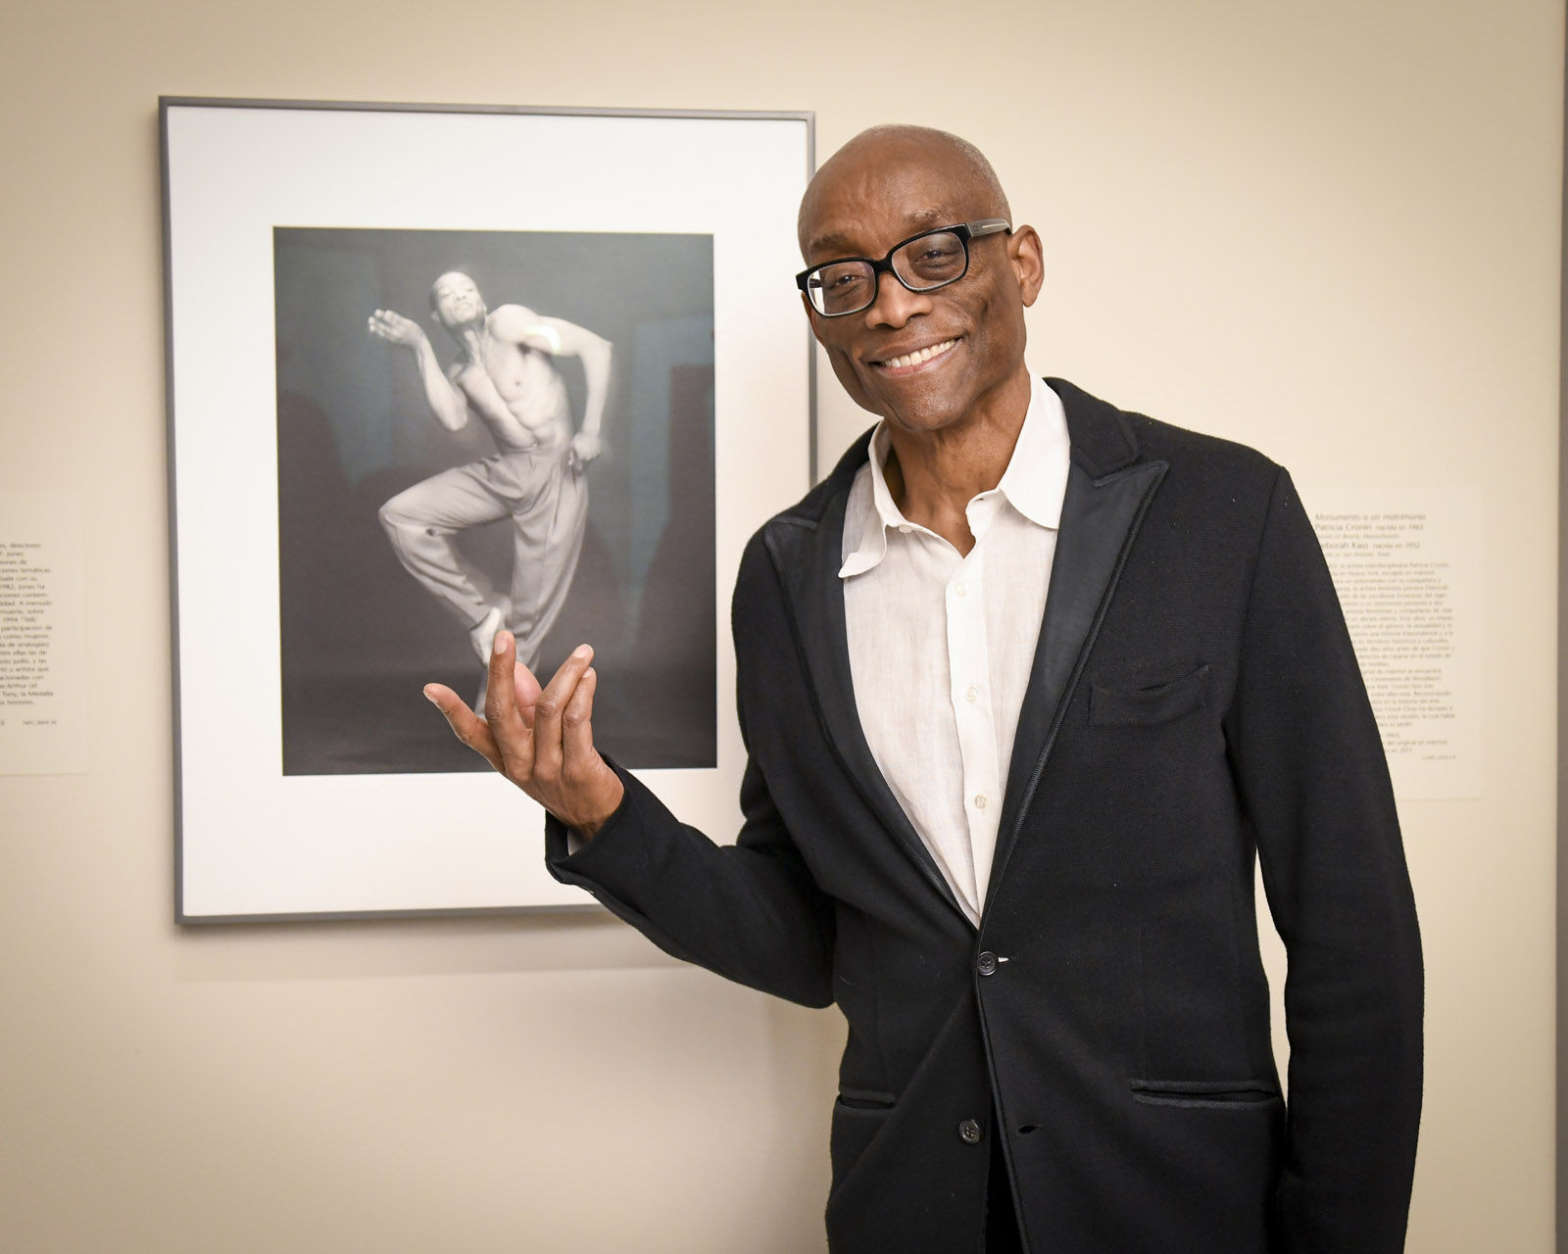 Artistic director, choreographer and dancer Bill T. Jones received the 2017 Portrait of a Nation Prize at The American Portrait Gala 2017 at Smithsonian's National Portrait Gallery on Sunday, Nov. 19, 2017 in Washington, D.C. (Courtesy National Portrait Gallery/Zach Hilty/BFA.com)